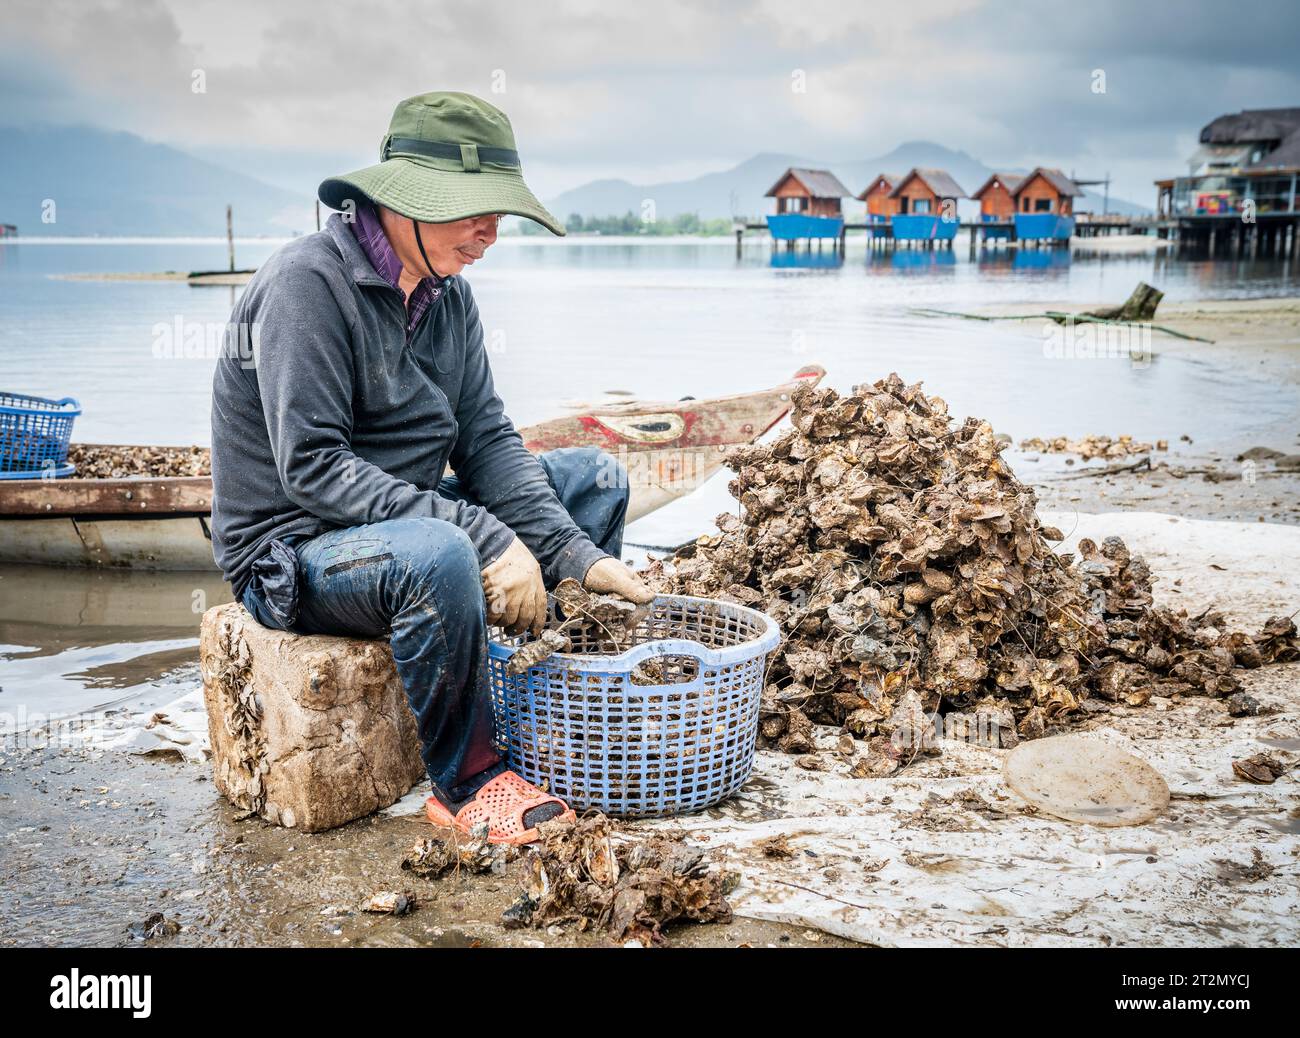 Central Vietnam, November 19, 2022: Fisherman is sorting morning catch of clams on the shore of the Tam Giang–Cau Hai lagoon in Central Vietnam Stock Photo